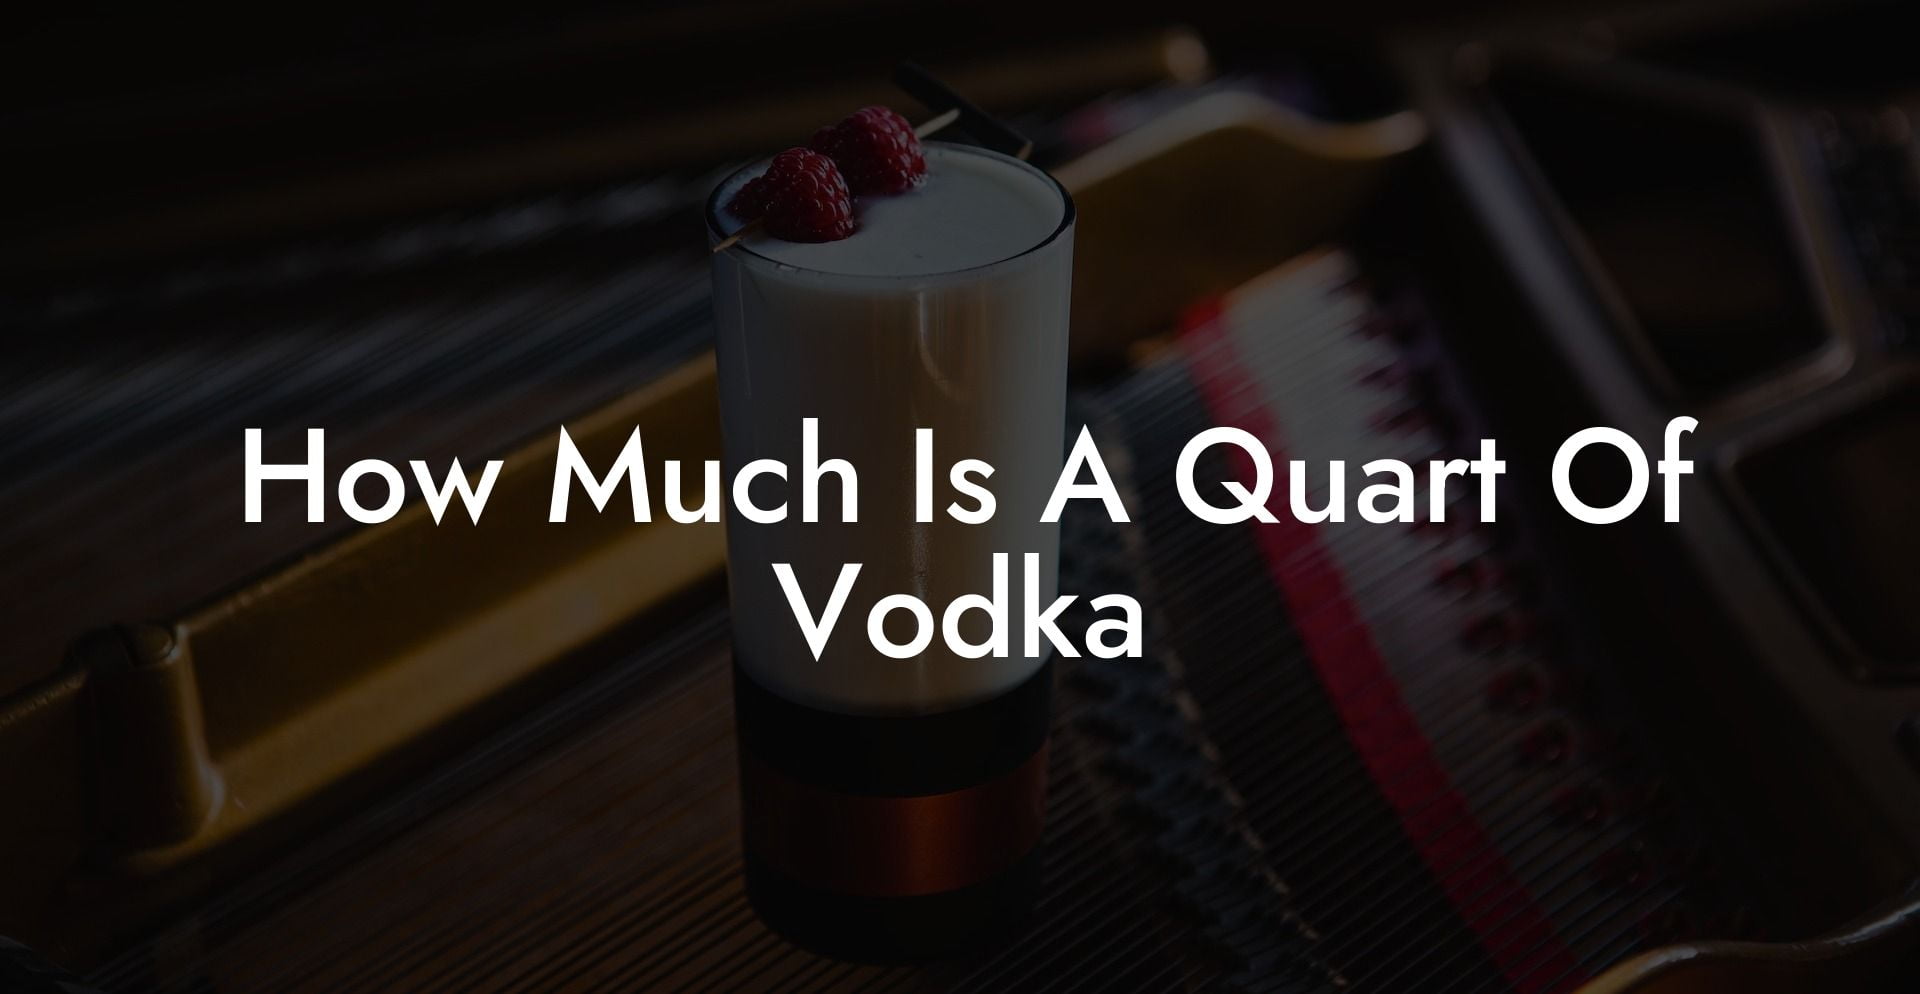 How Much Is A Quart Of Vodka